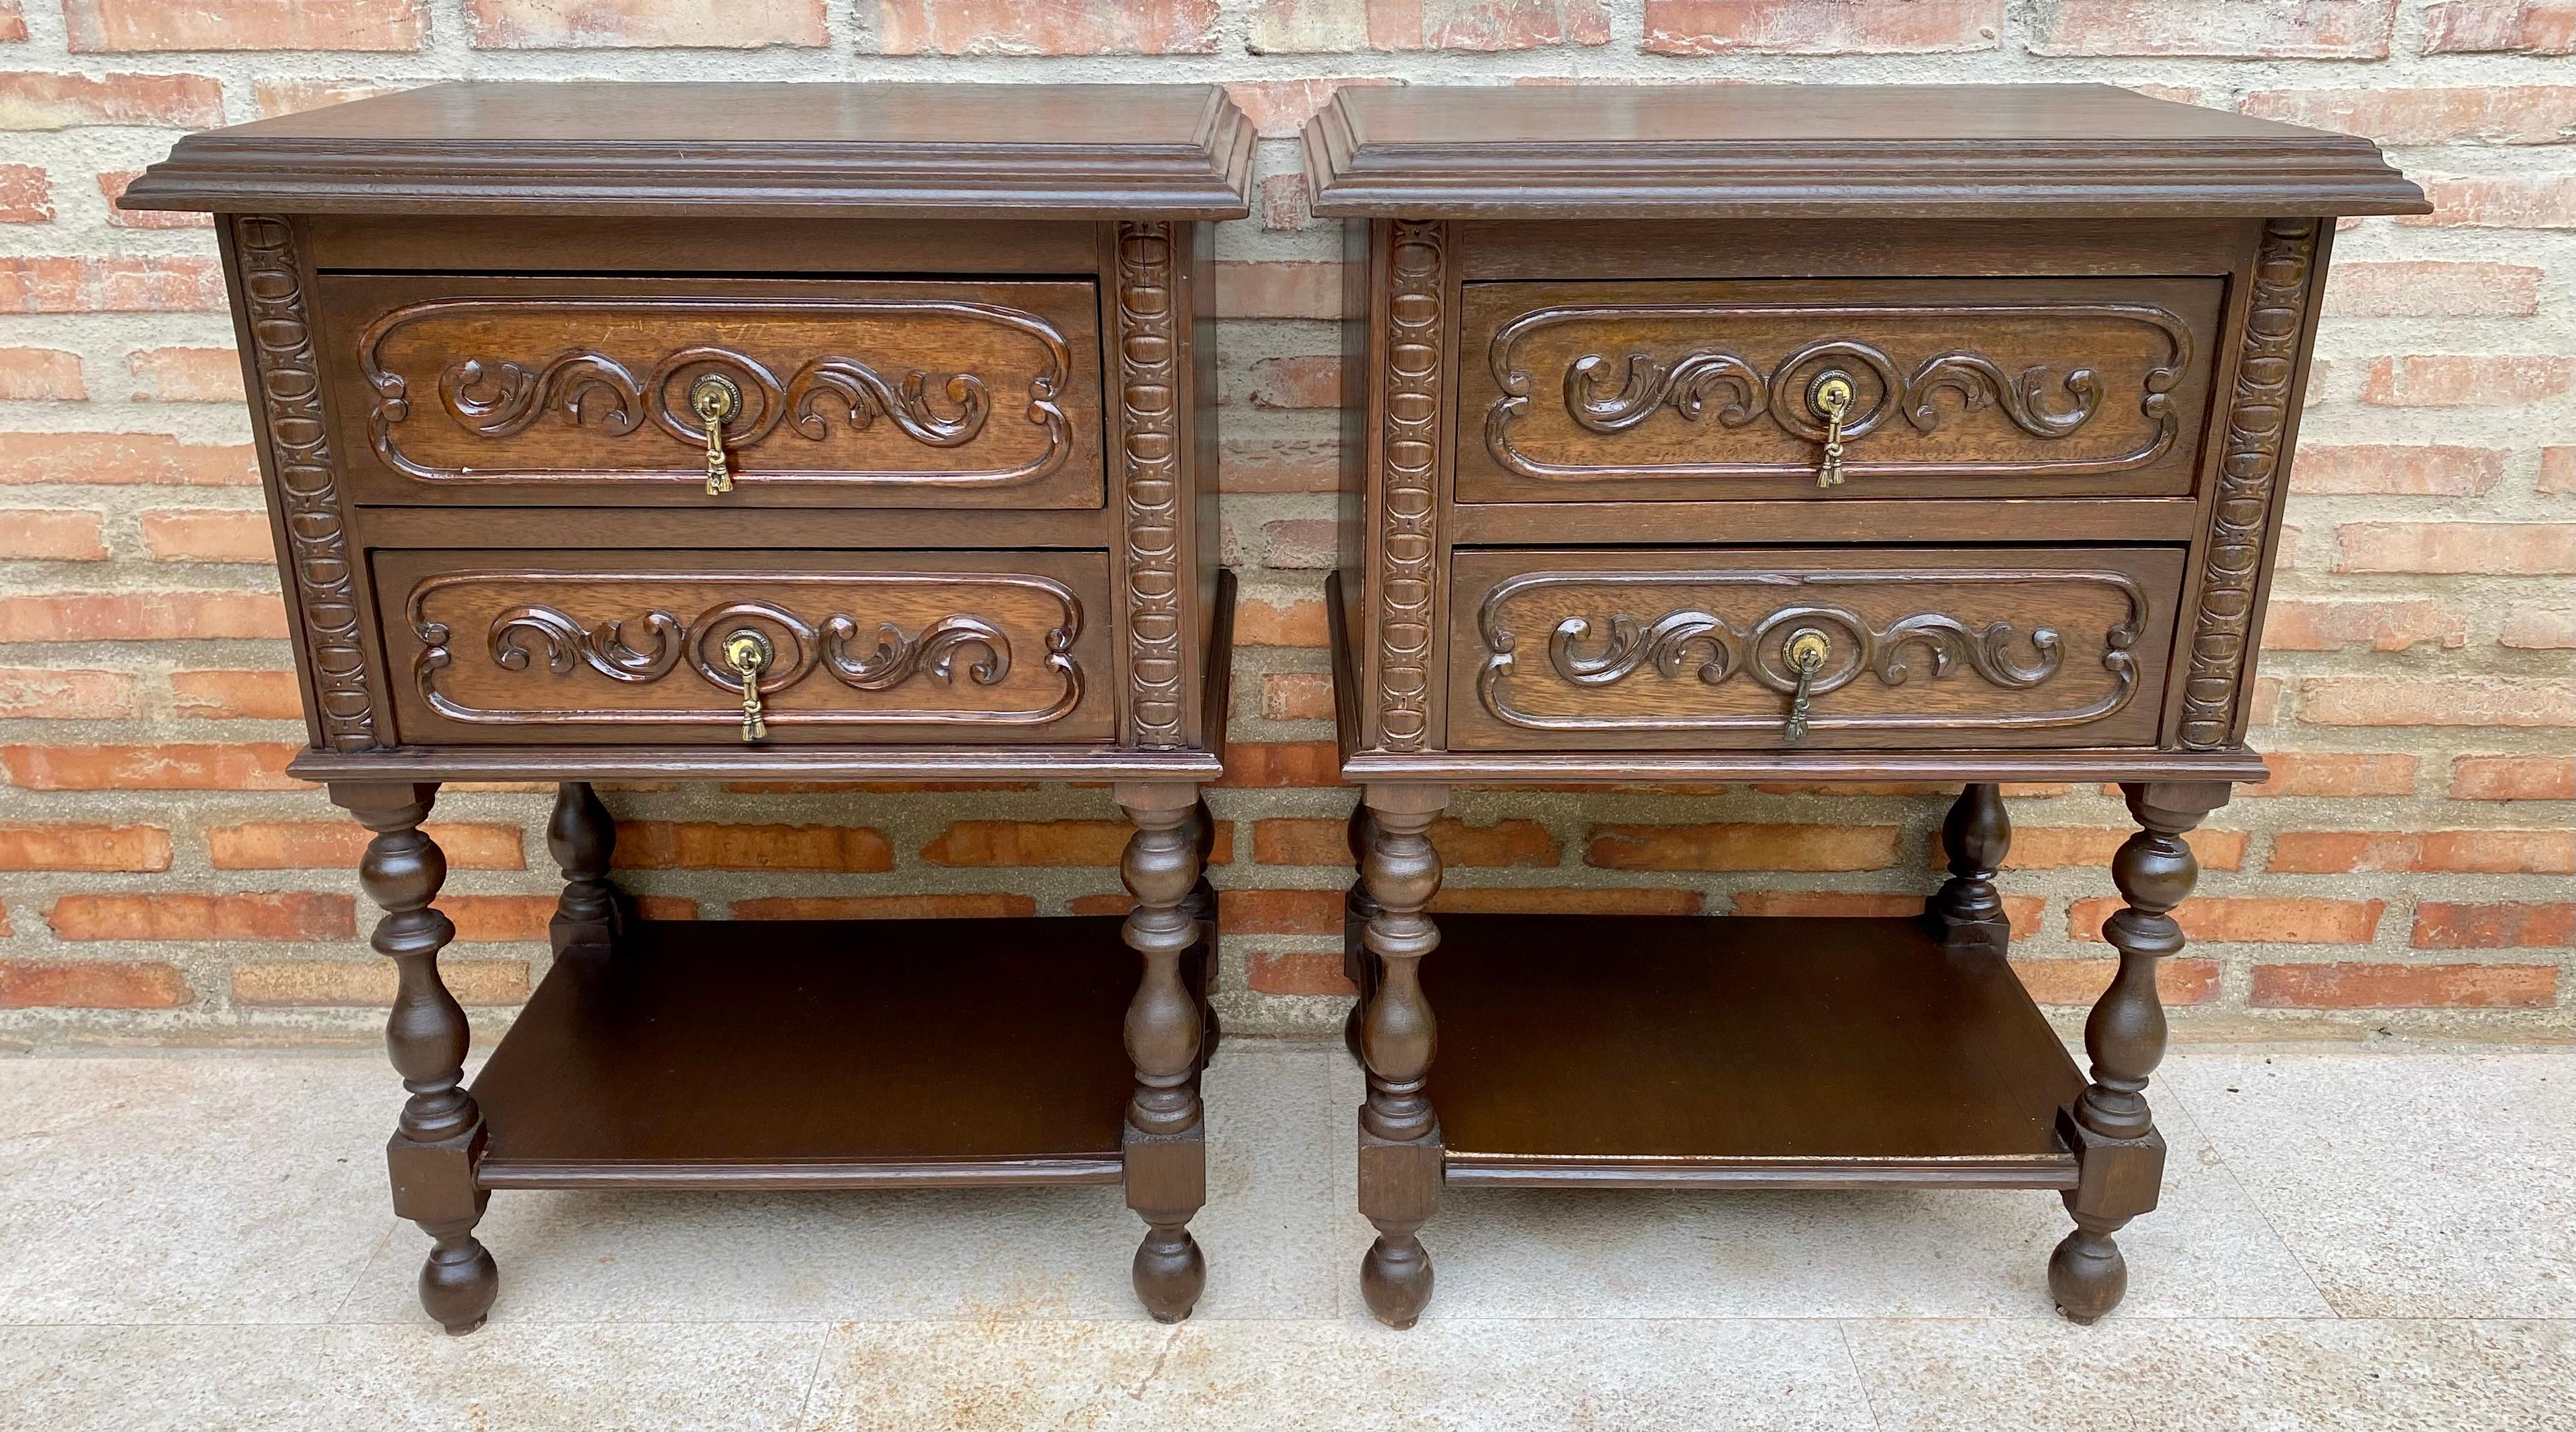 20th century pair of solid carved French nightstands with turned columns, two drawers and one low shelve. 
It has two carved drawers with original bronze pulls.